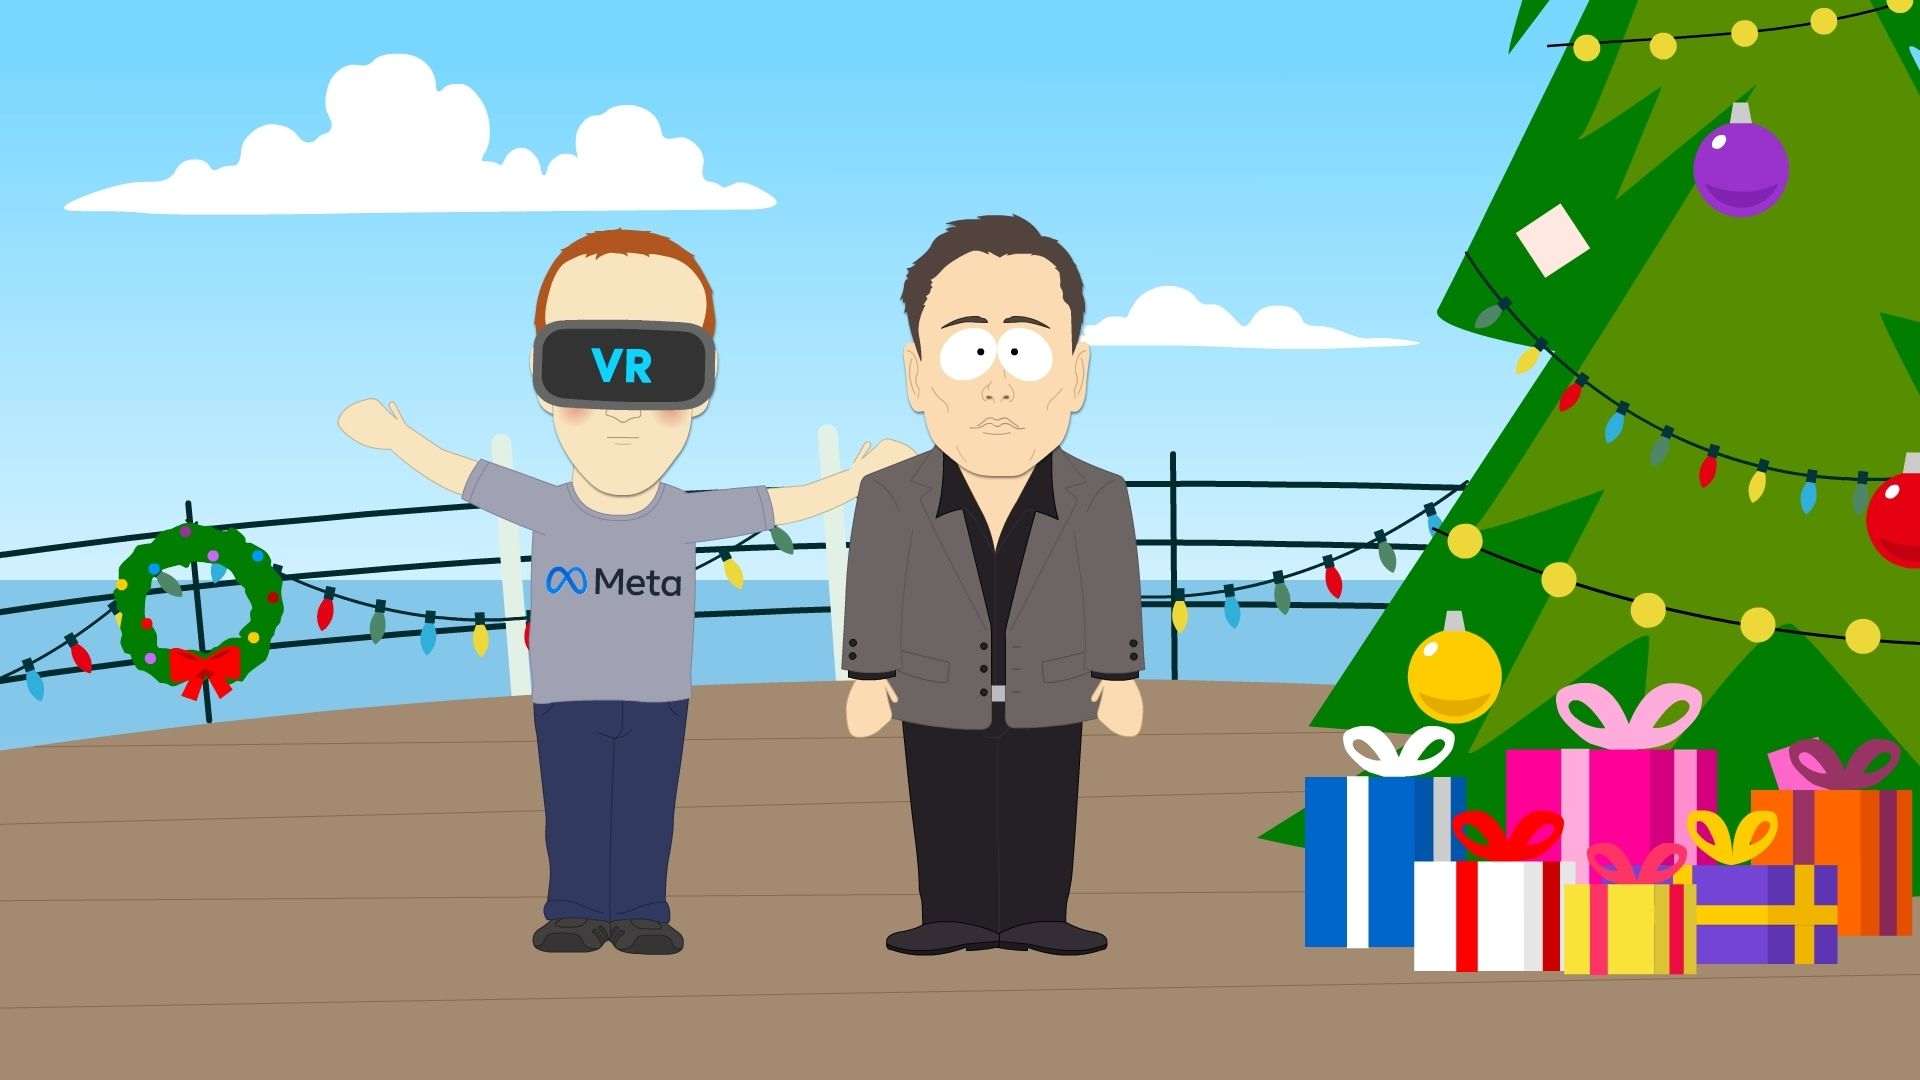 Funny Animation | South Park Style